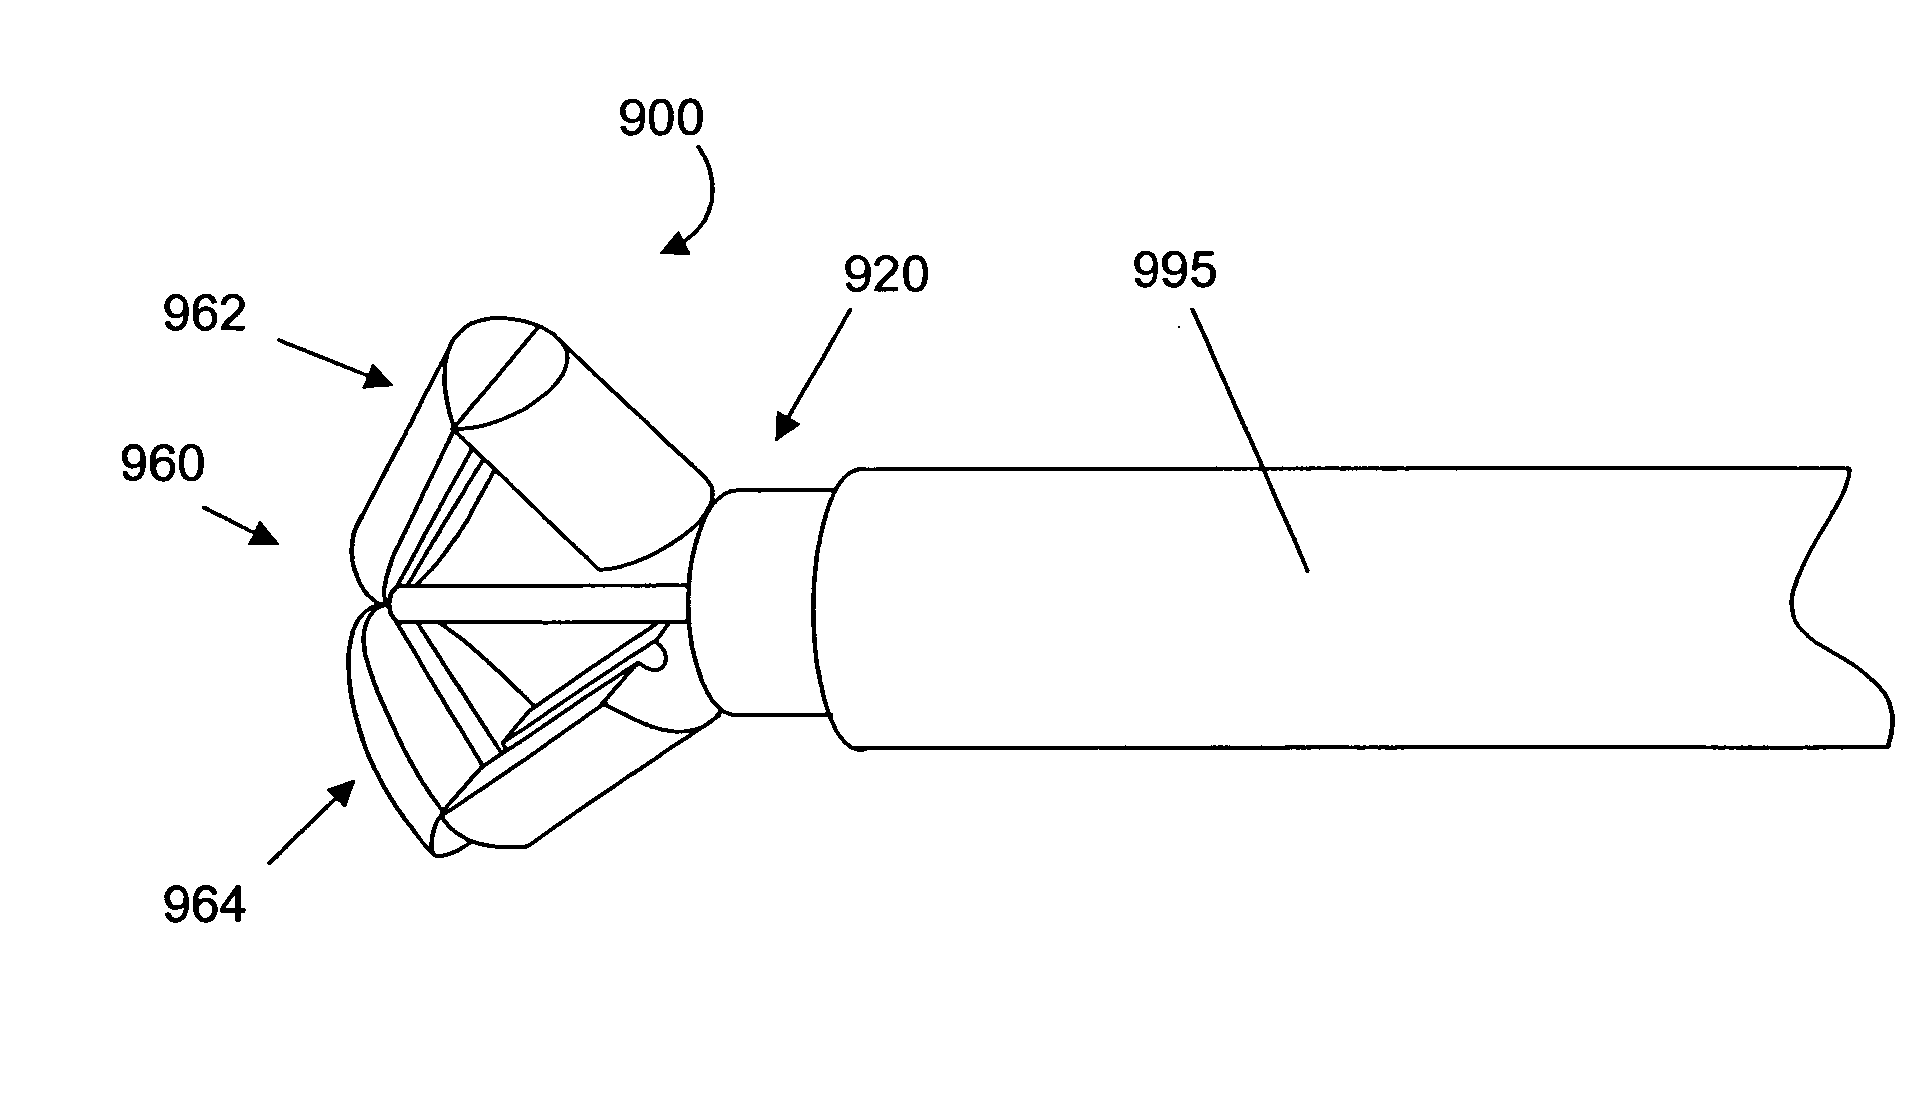 Interspinous process implant having deployable wings and method of implantation